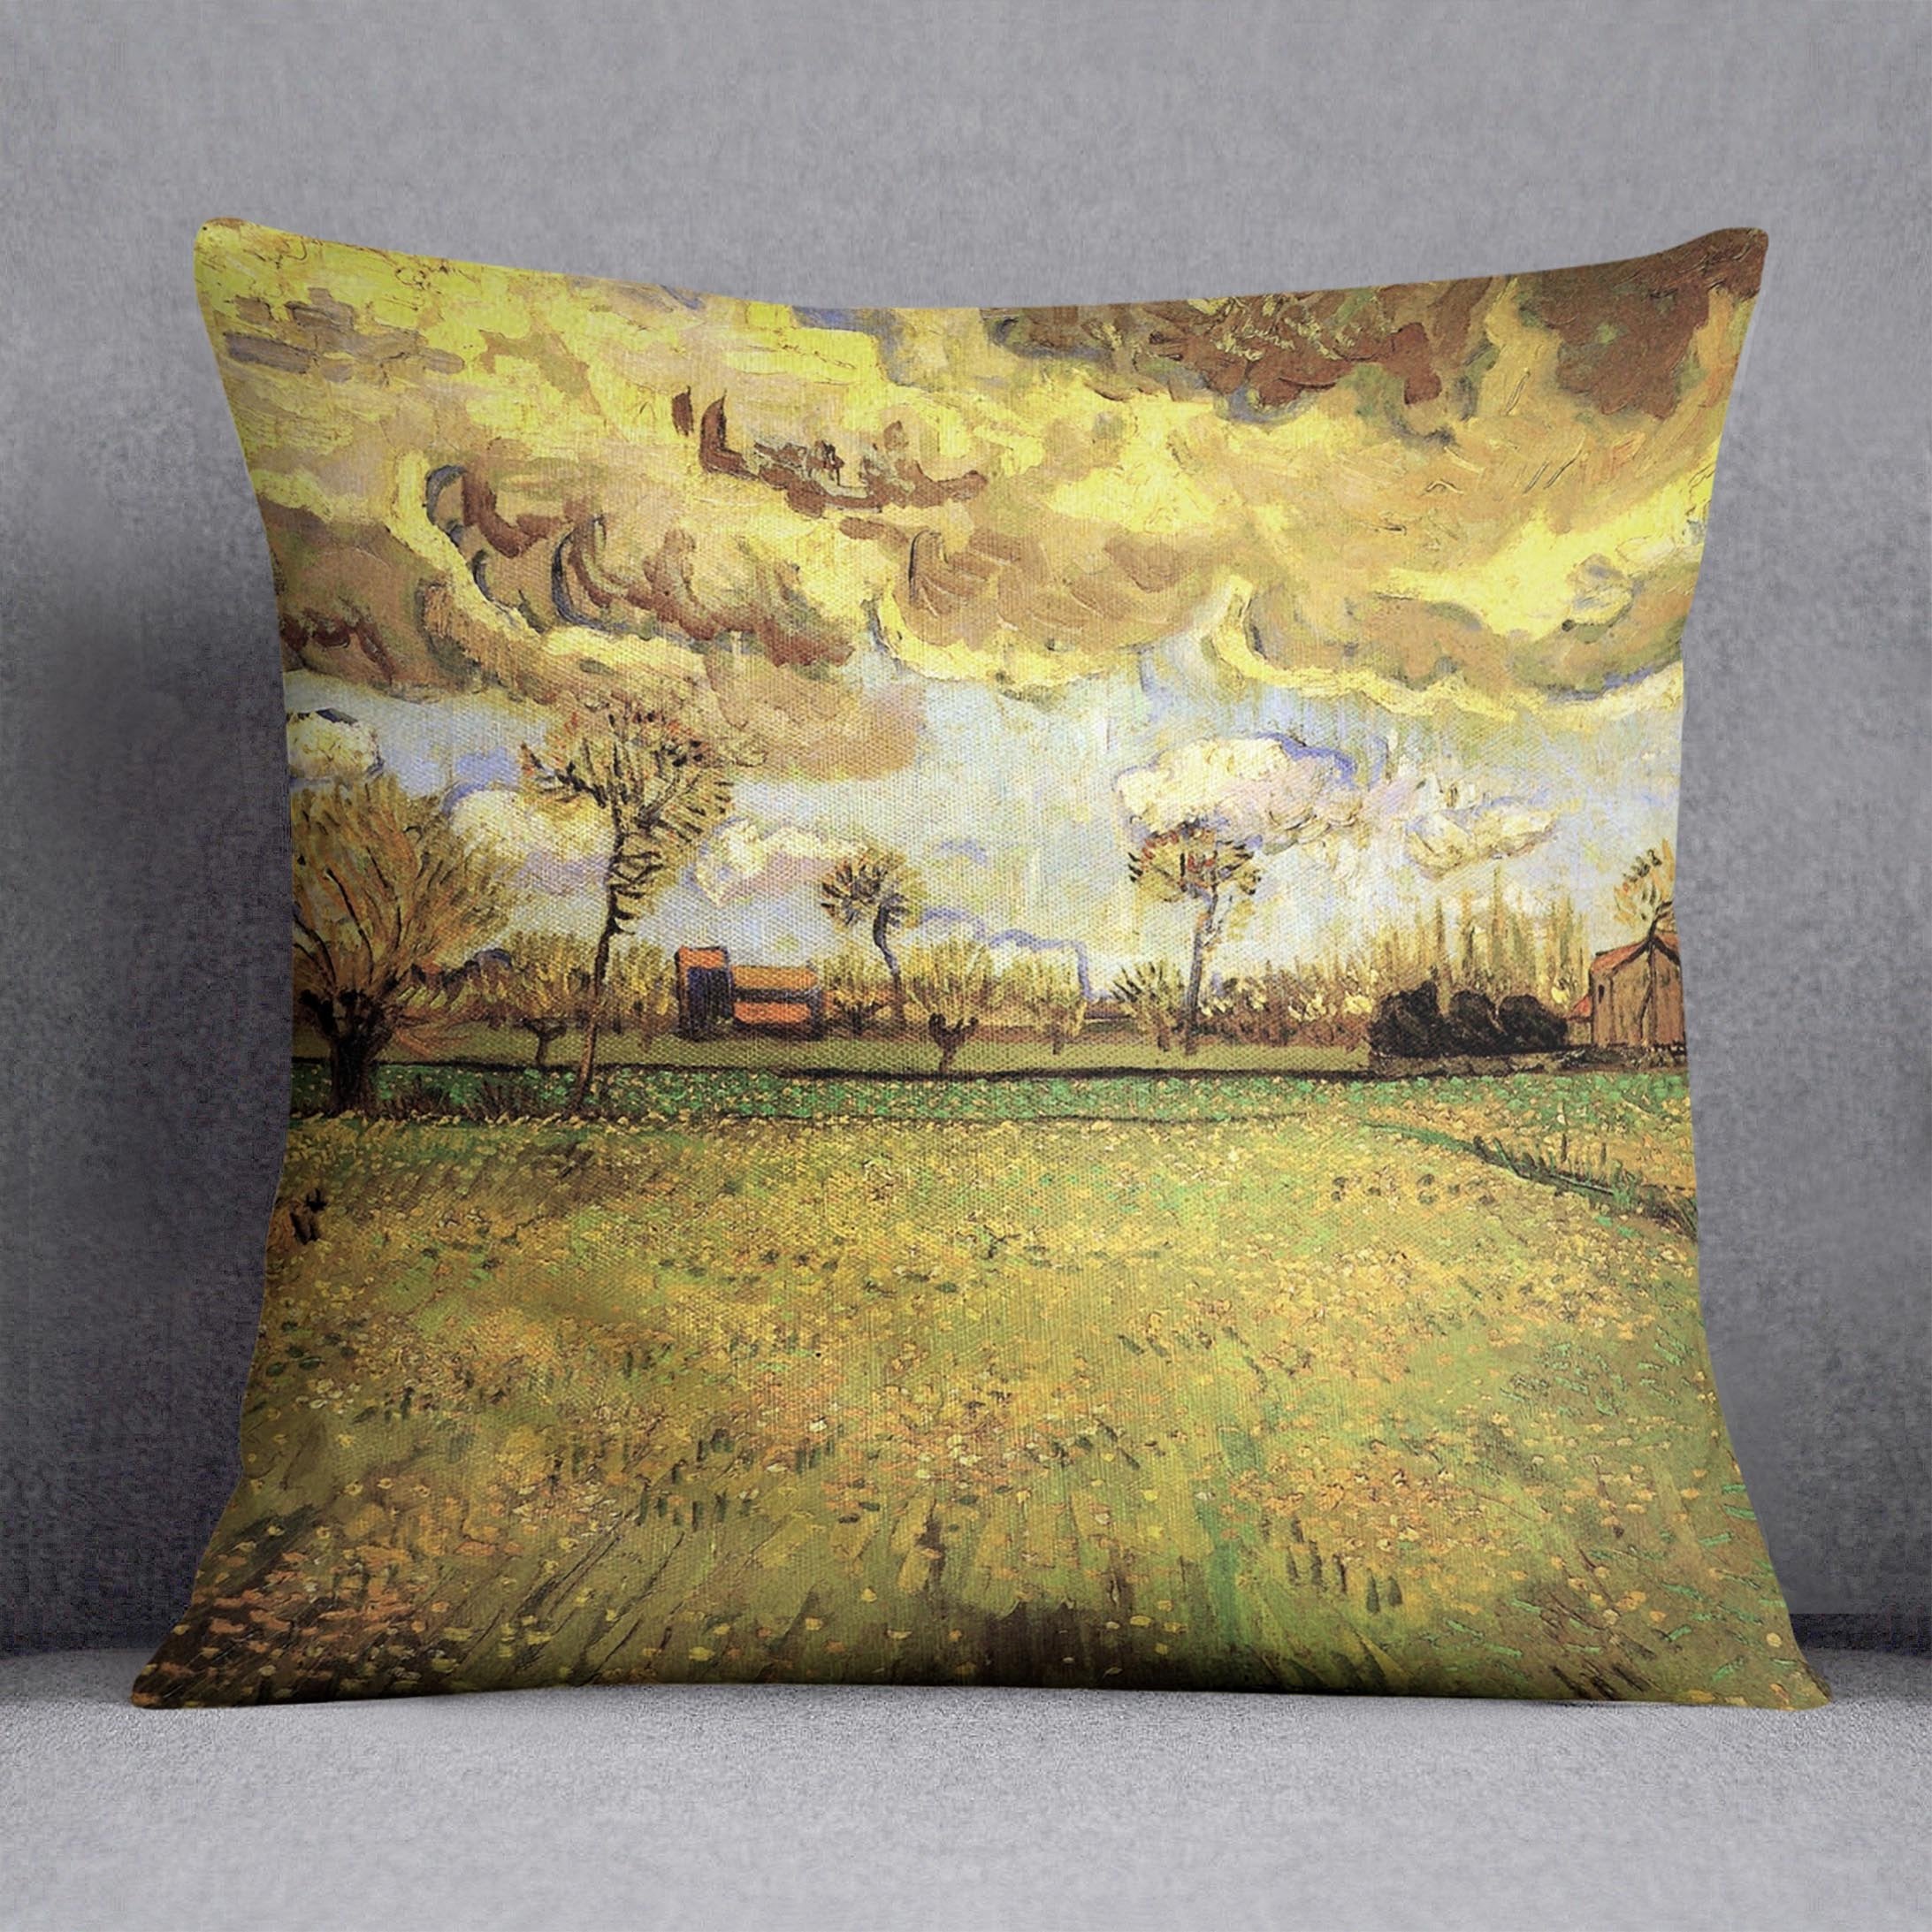 Landscape Under a Stormy Sky by Van Gogh Throw Pillow